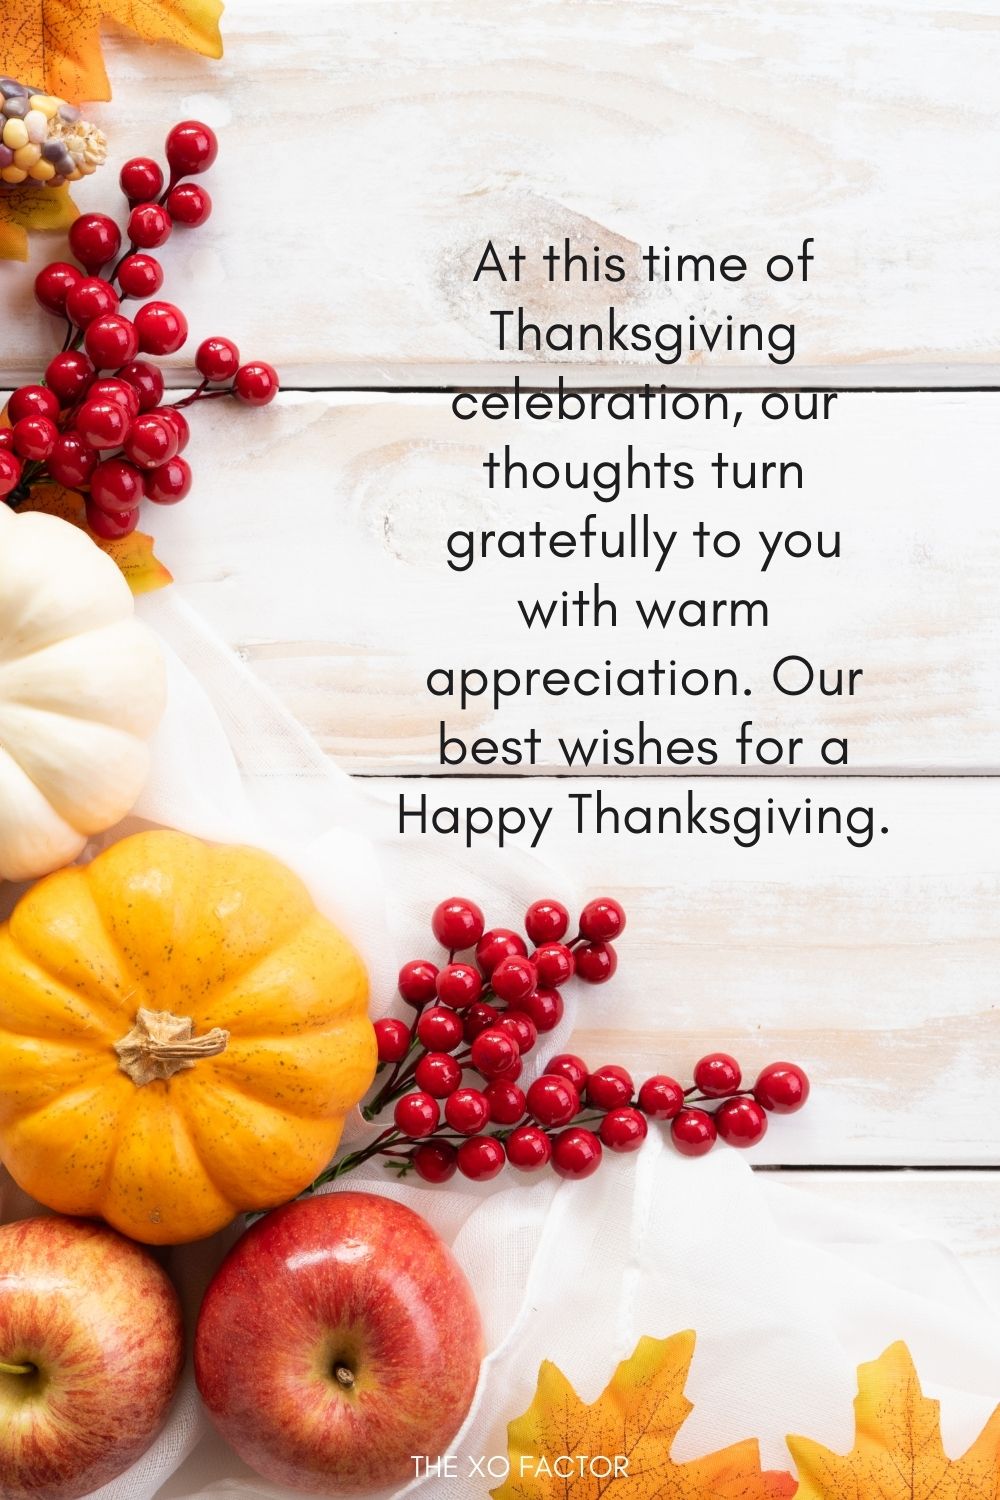 At this time of Thanksgiving celebration, our thoughts turn gratefully to you with warm appreciation. Our best wishes for a Happy Thanksgiving.